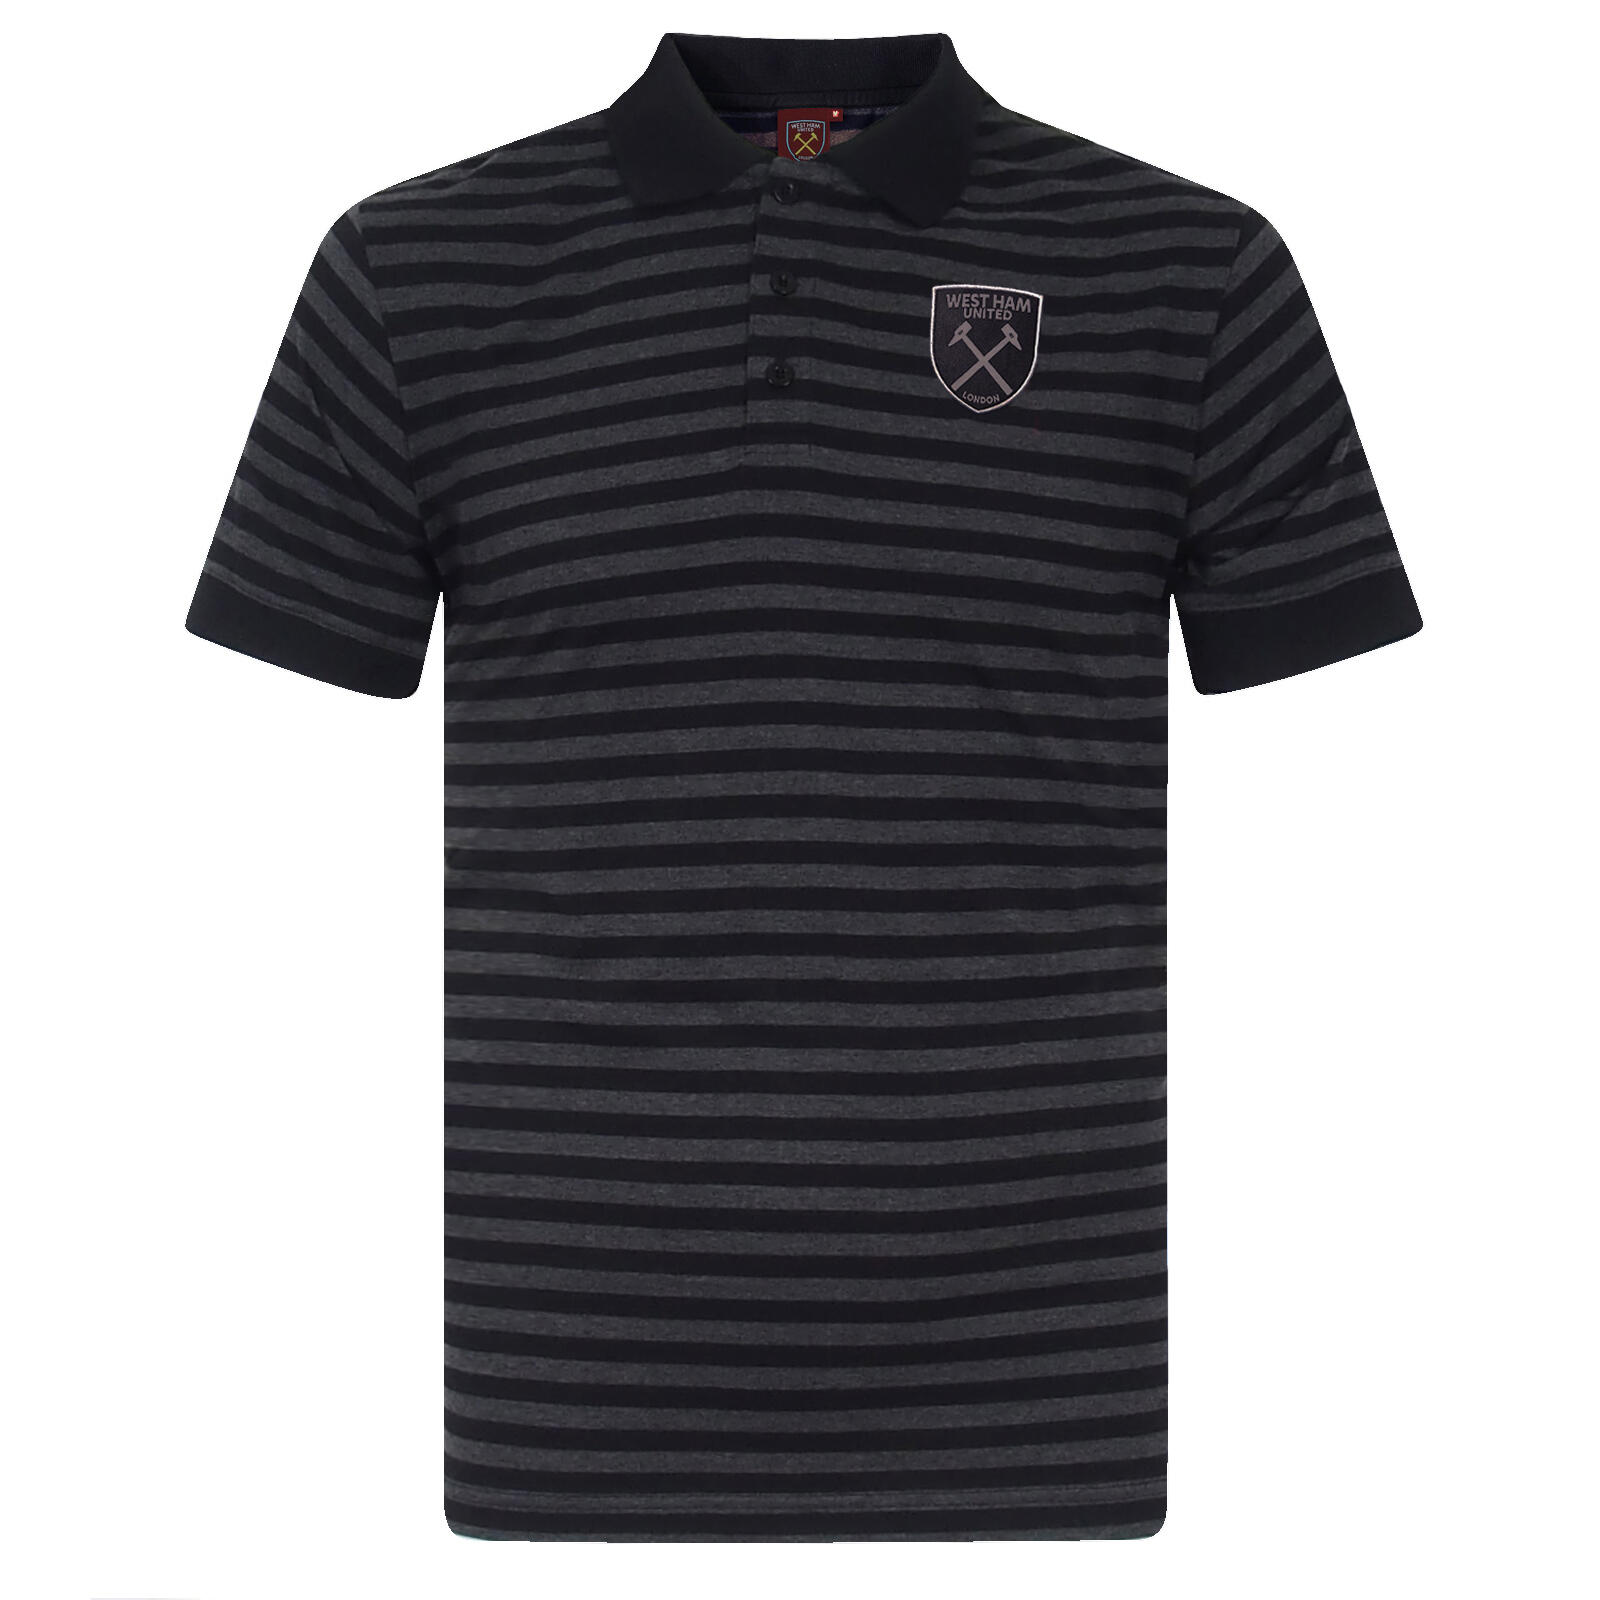 West Ham United Mens Polo Shirt Striped OFFICIAL Football Gift 1/2